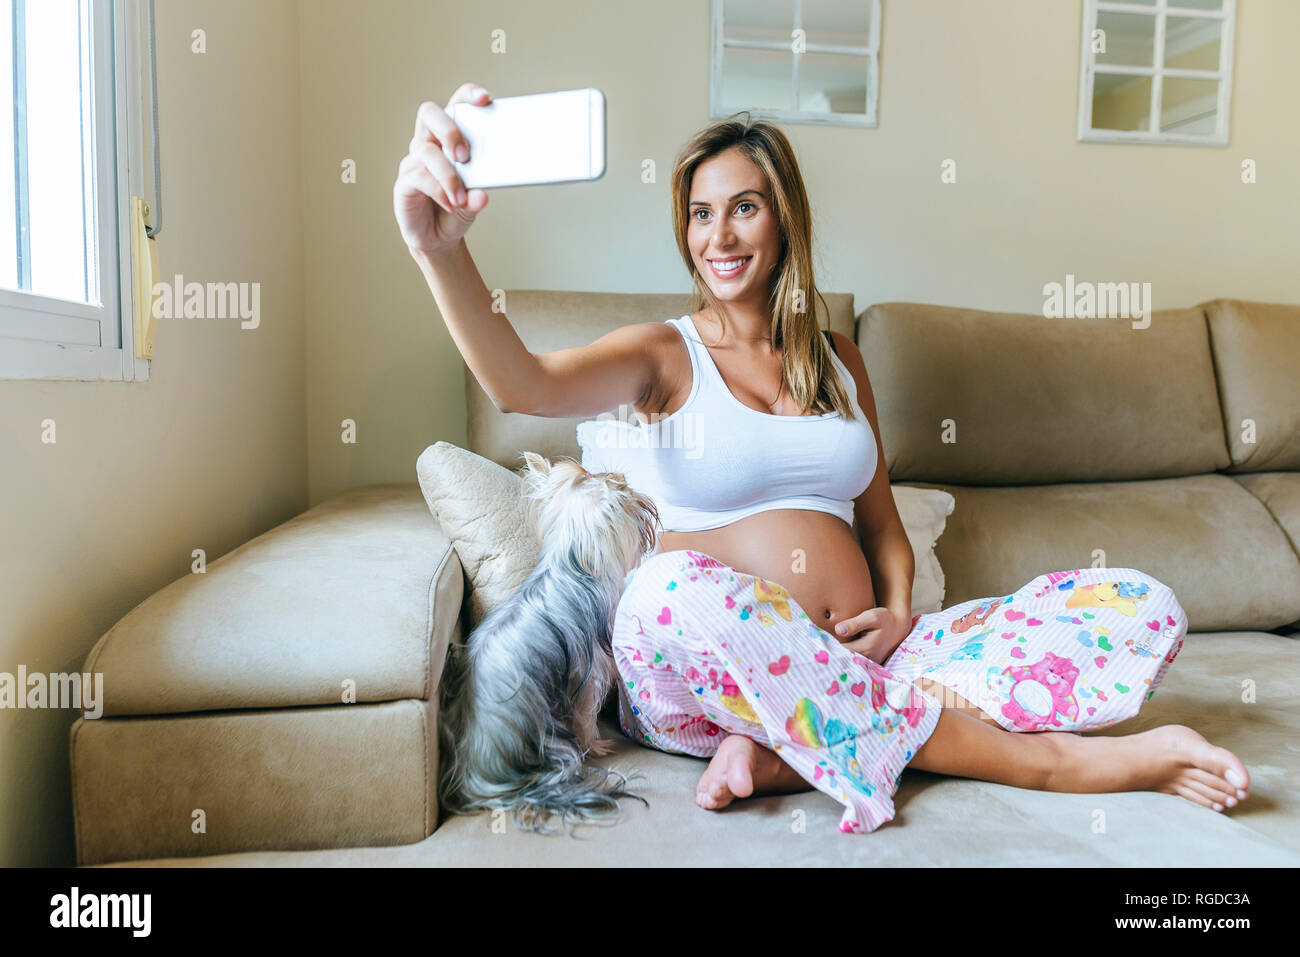 Smiling pregnant woman taking a selfie with dog on the couch at home Stock Photo